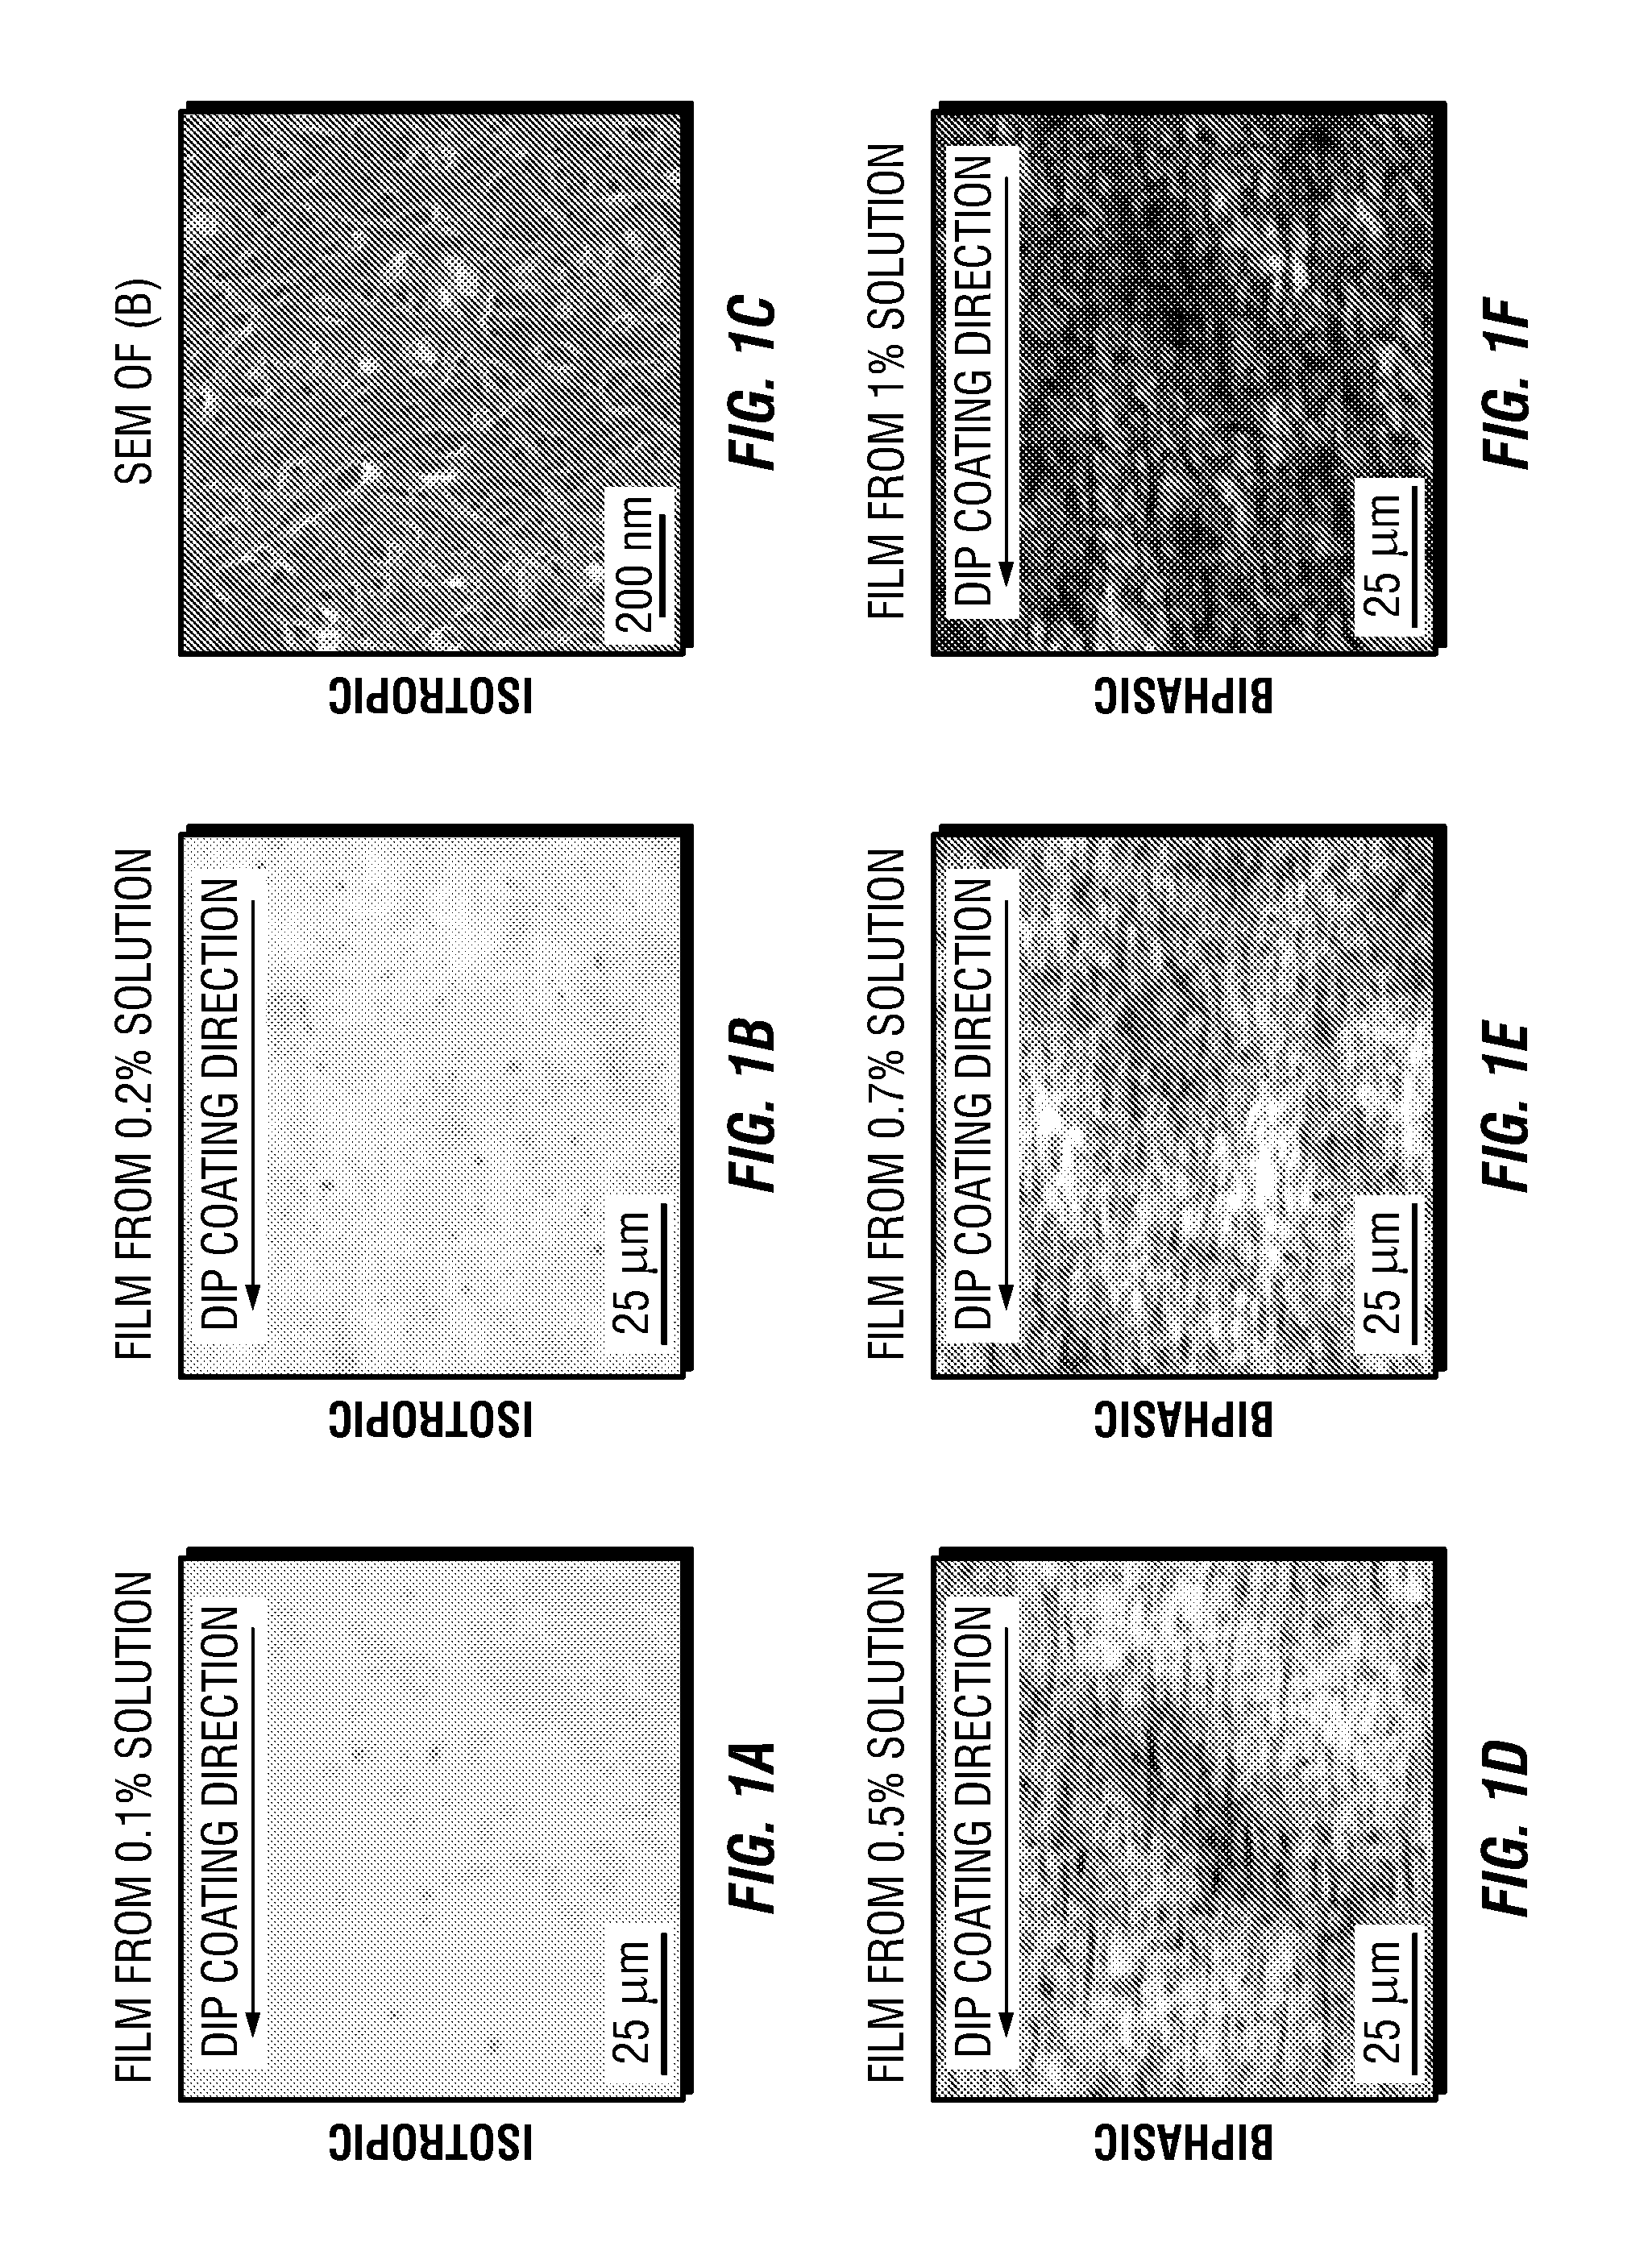 Carbon nanotube films processed from strong acid solutions and methods for production thereof